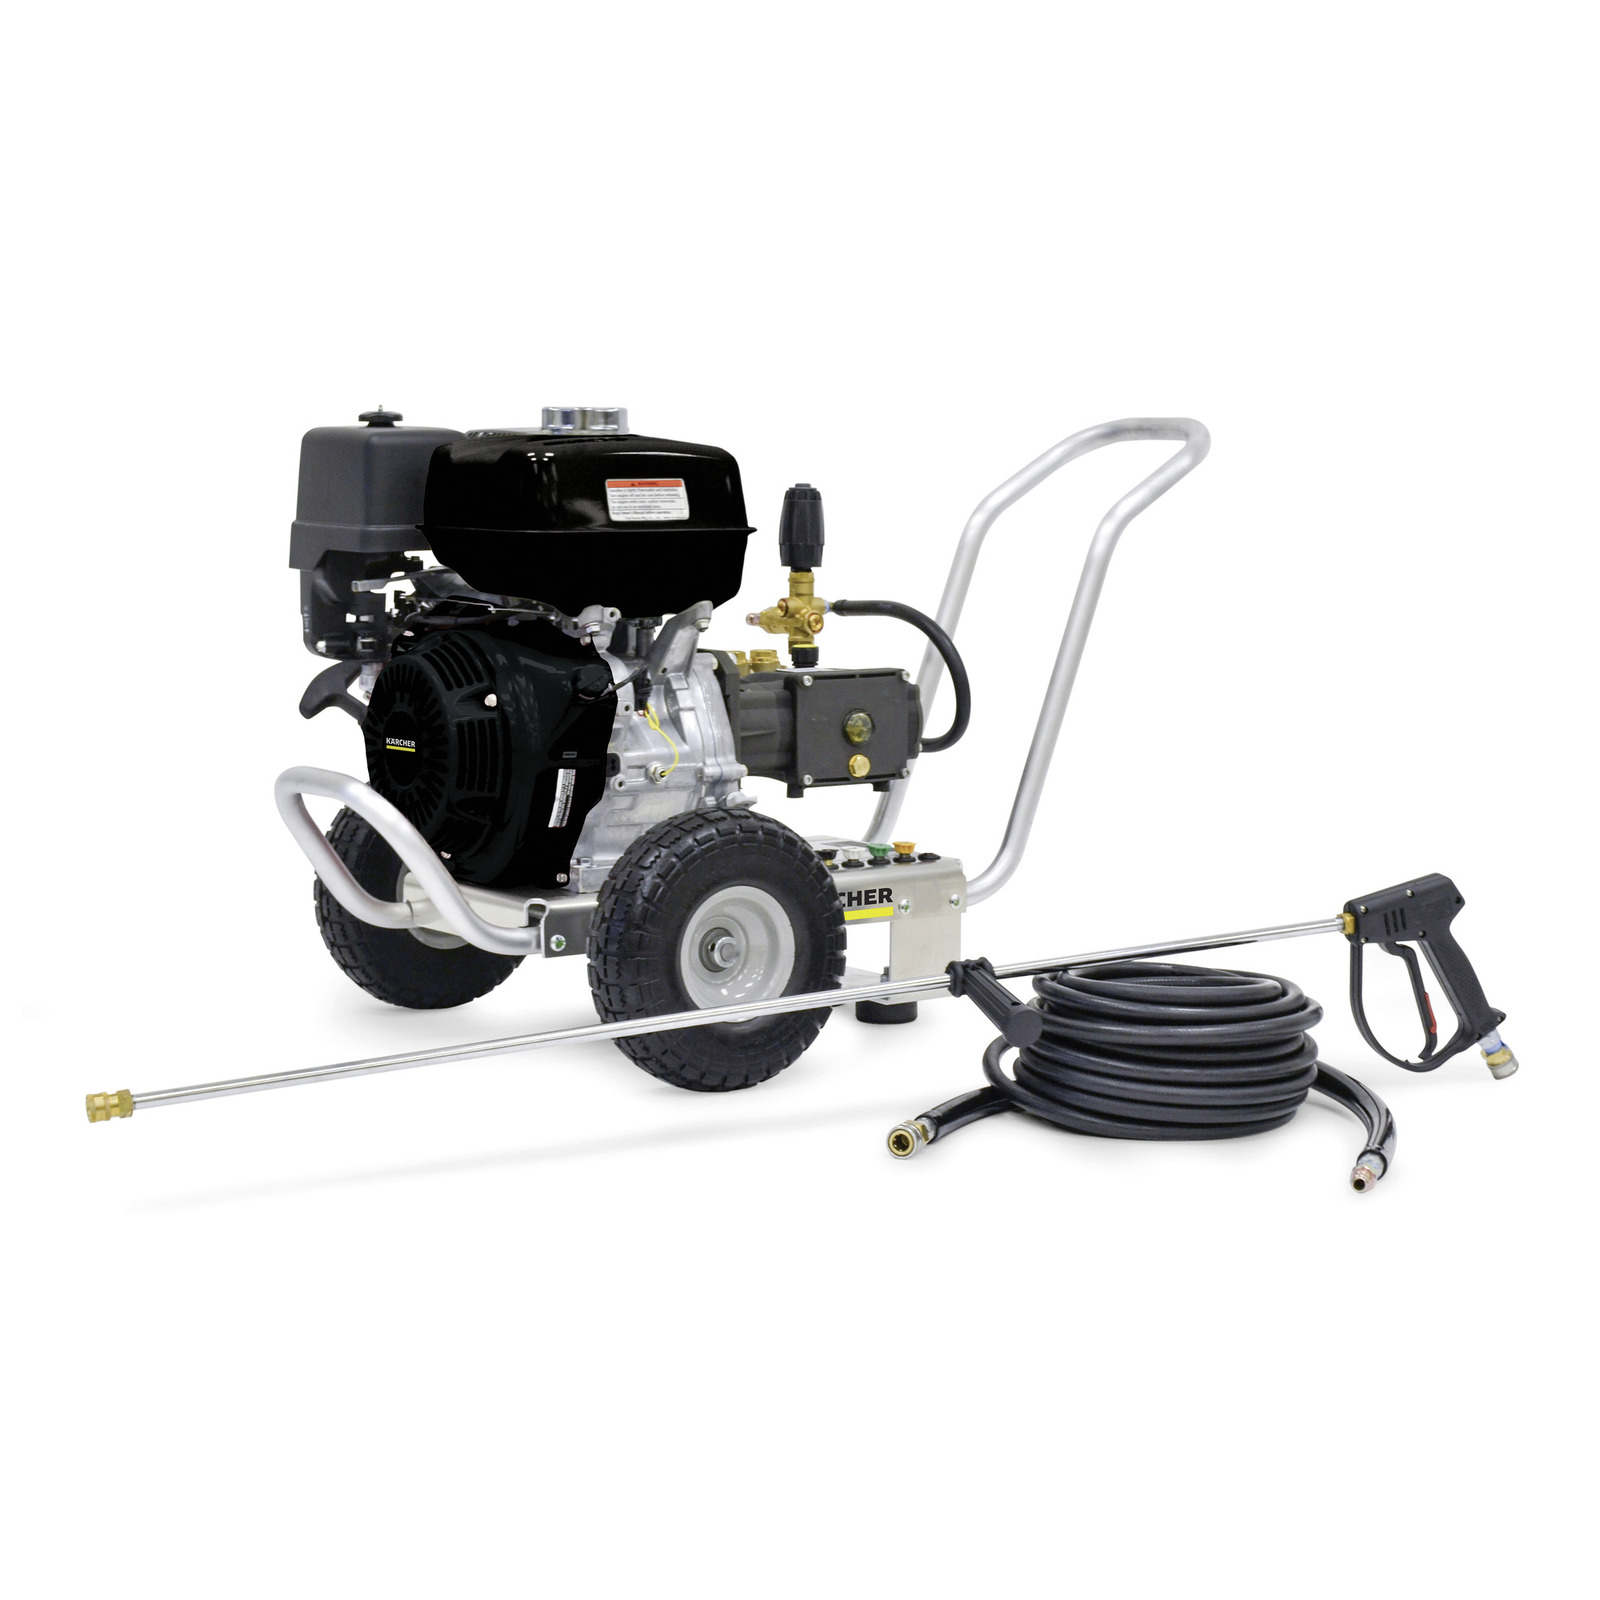 Karcher Teton Series Pressure Washers karcher, jarvis, surface, cleaner, pressure, washer, scw 2.4/25 G, cold-water, cold, cleaning, professional, commercial, gas, powered, gasoline, 